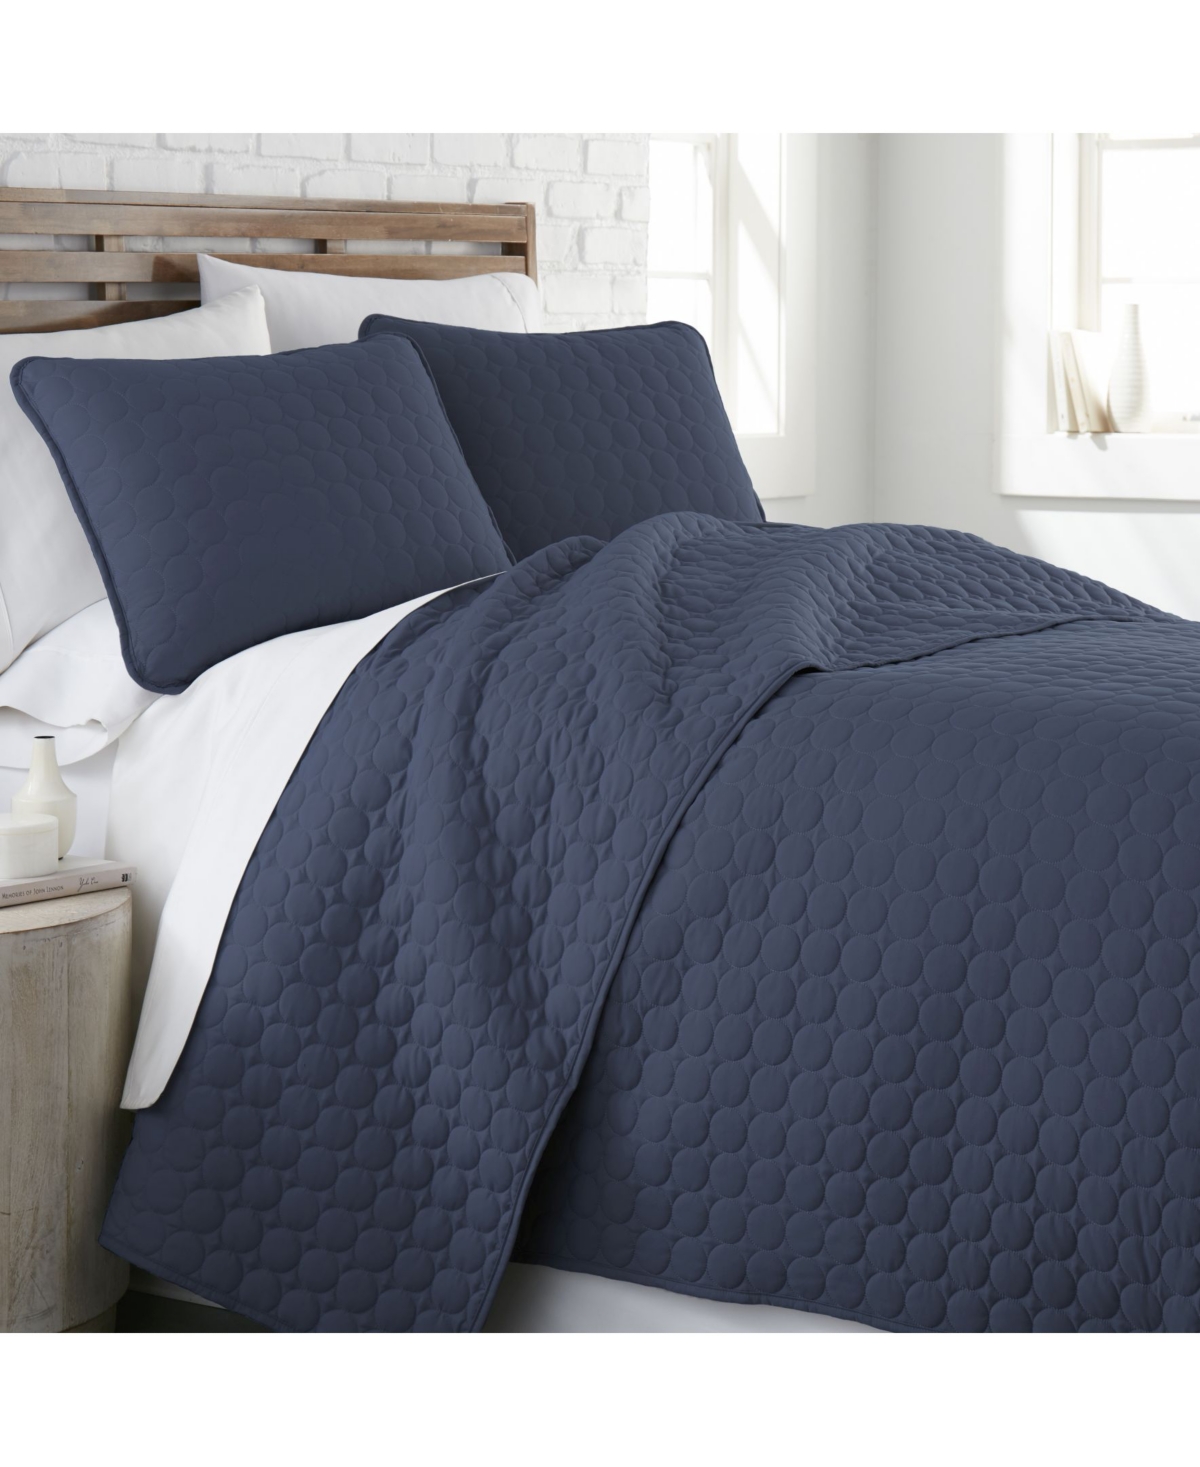 Southshore Fine Linens Ultra-soft Lightweight Embroidered 3-piece Quilt Set, Full/queen In Navy